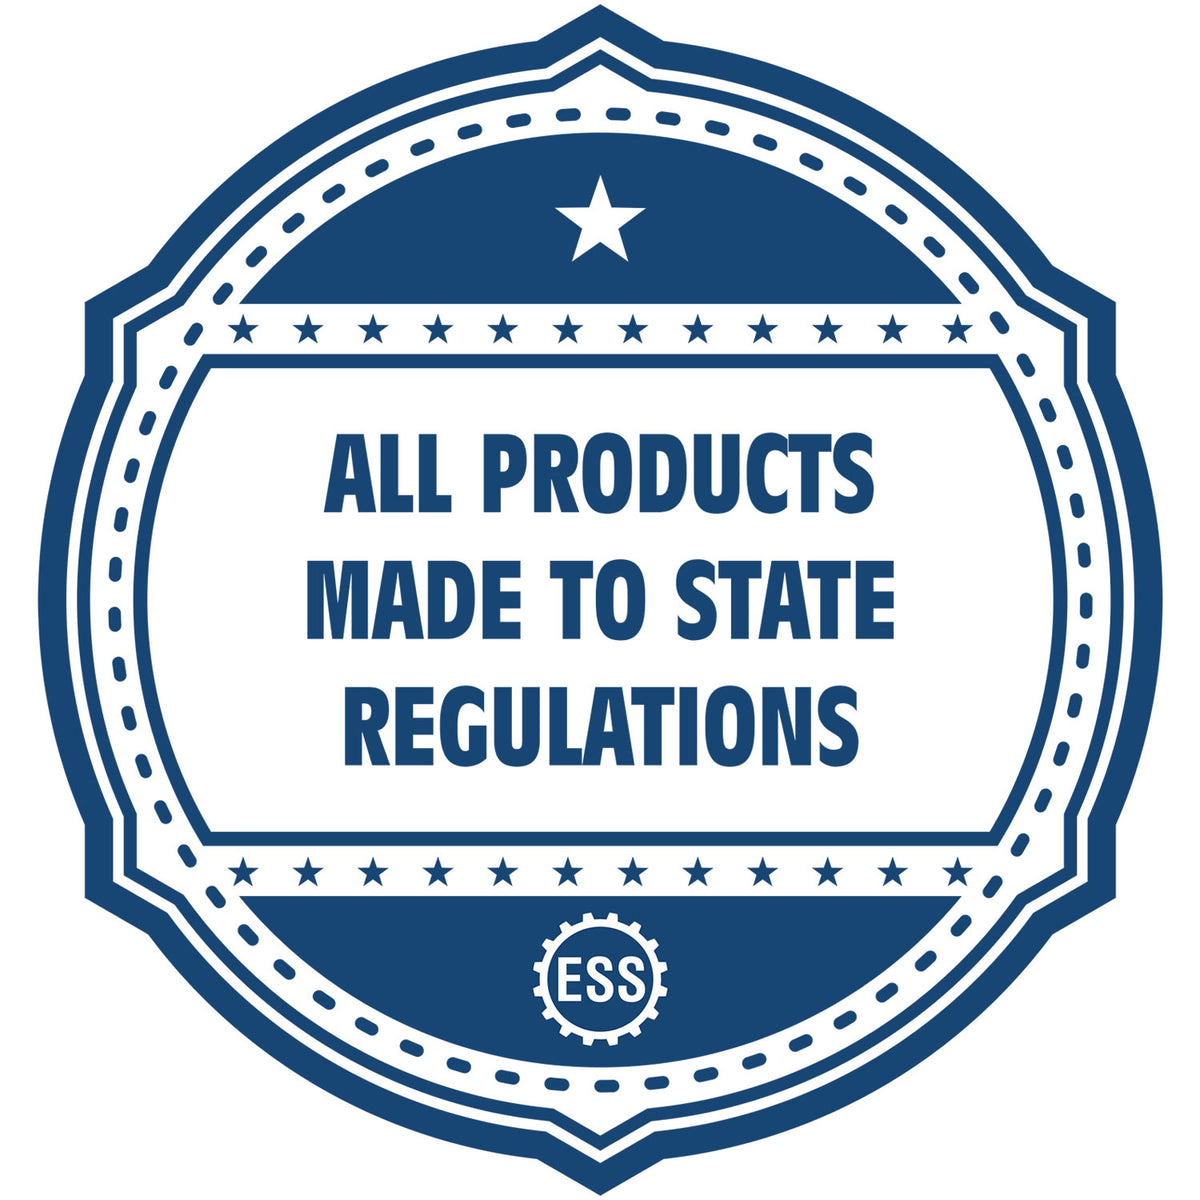 An icon or badge element for the Heavy Duty Cast Iron Mississippi Engineer Seal Embosser showing that this product is made in compliance with state regulations.